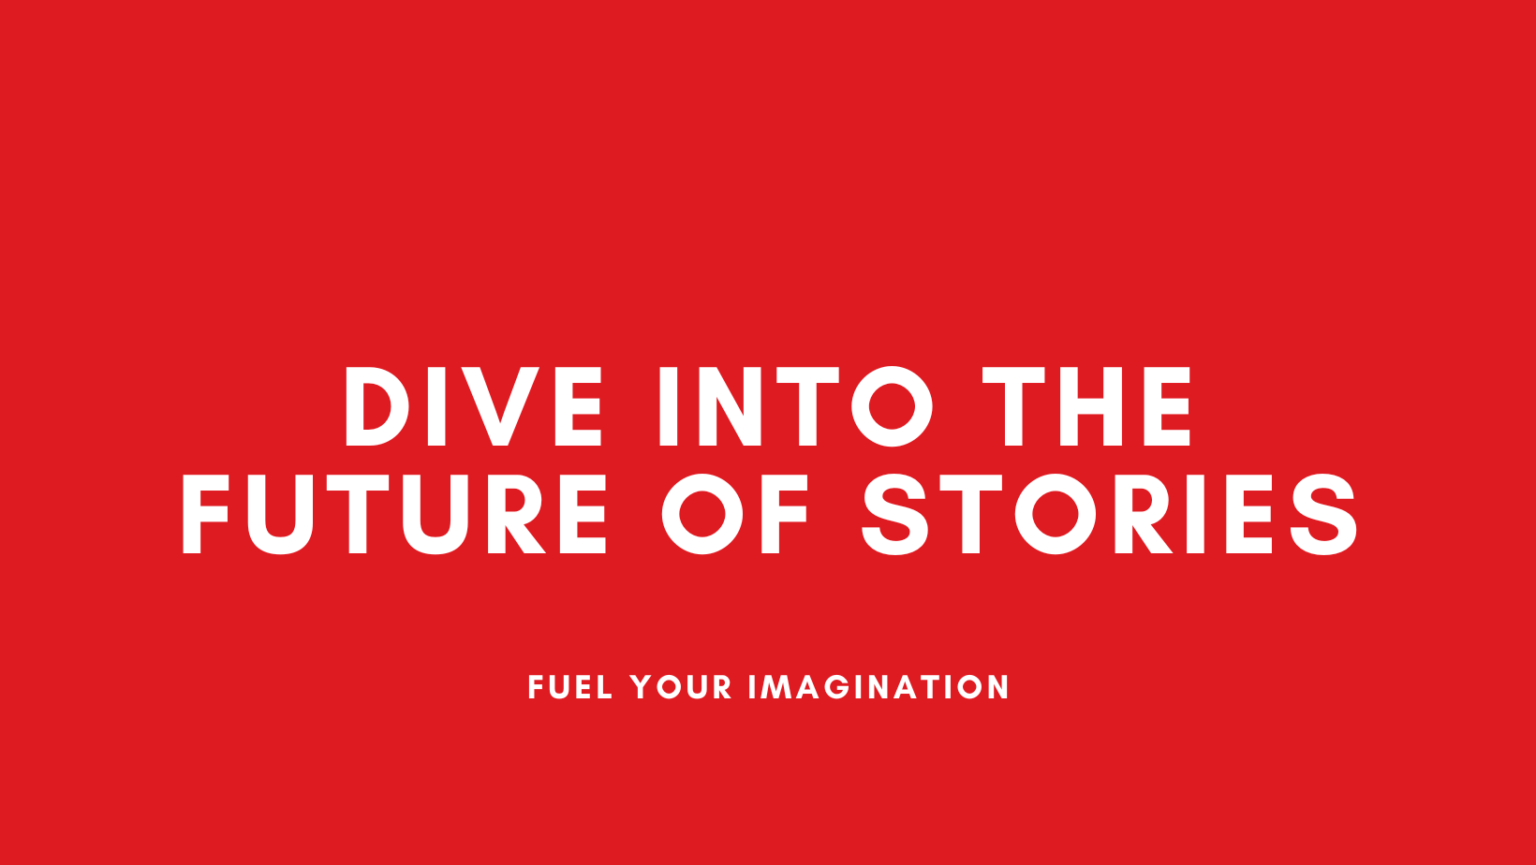 Dive into the future of stories